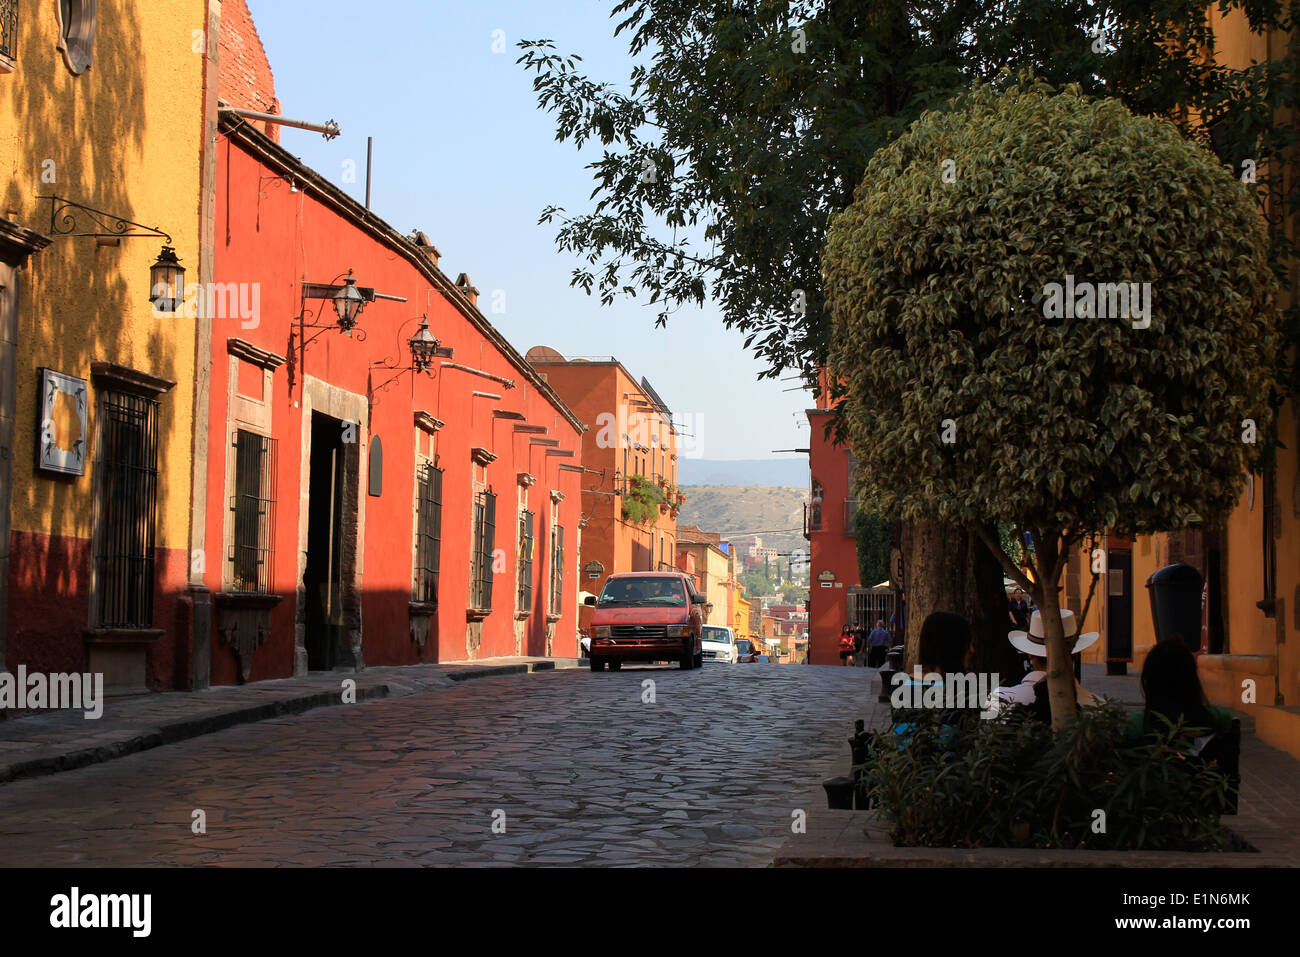 Looking down a cobbled street lined with colourful houses in San Miguel de Allende, Guanajuato, Mexico / Calle en San Miguel Stock Photo